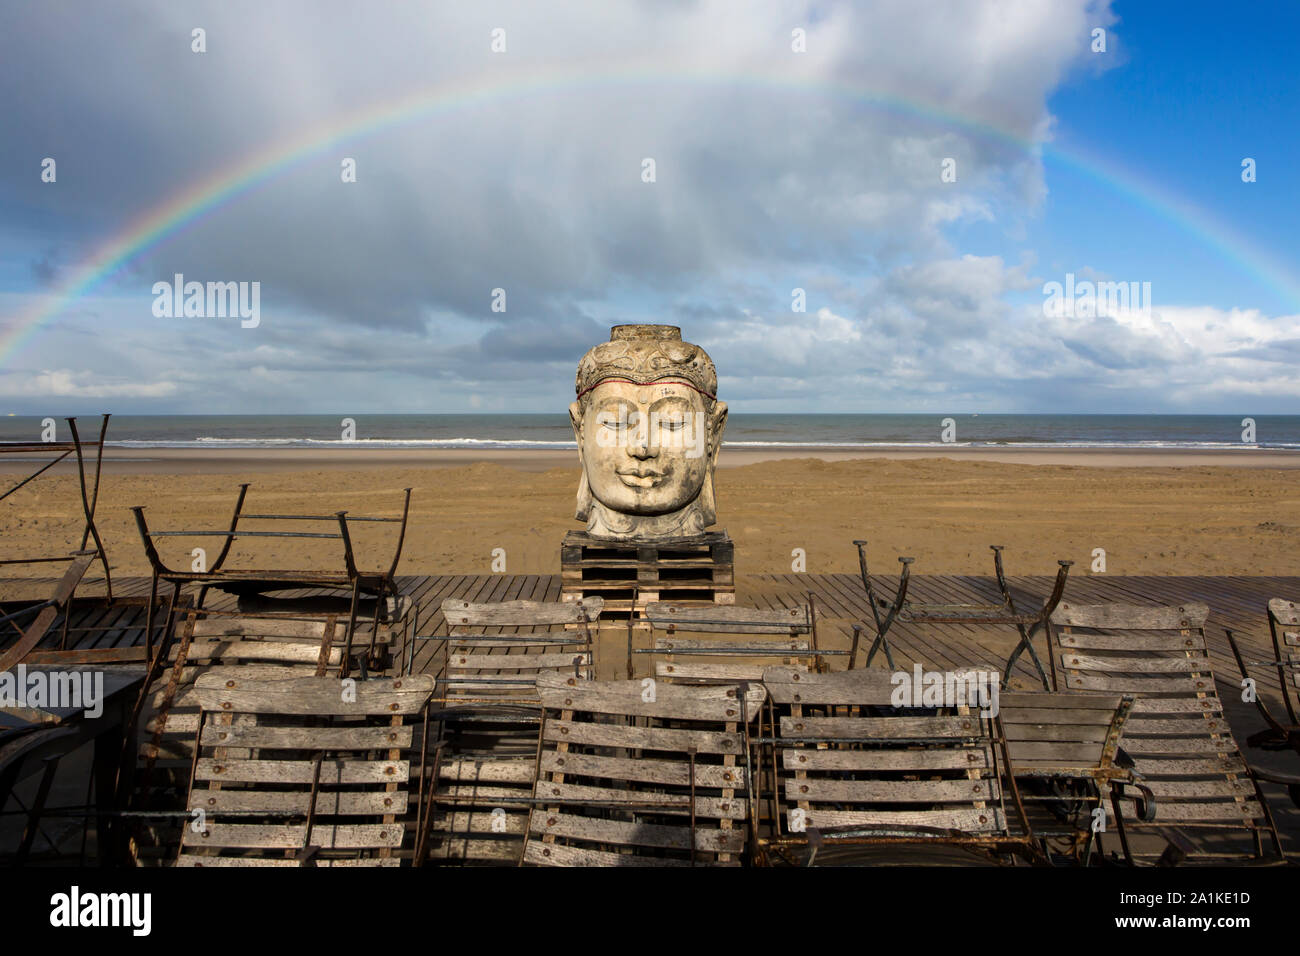 THE HAGUE - Budha statue with rainbow at the beginning of the beach season Stock Photo